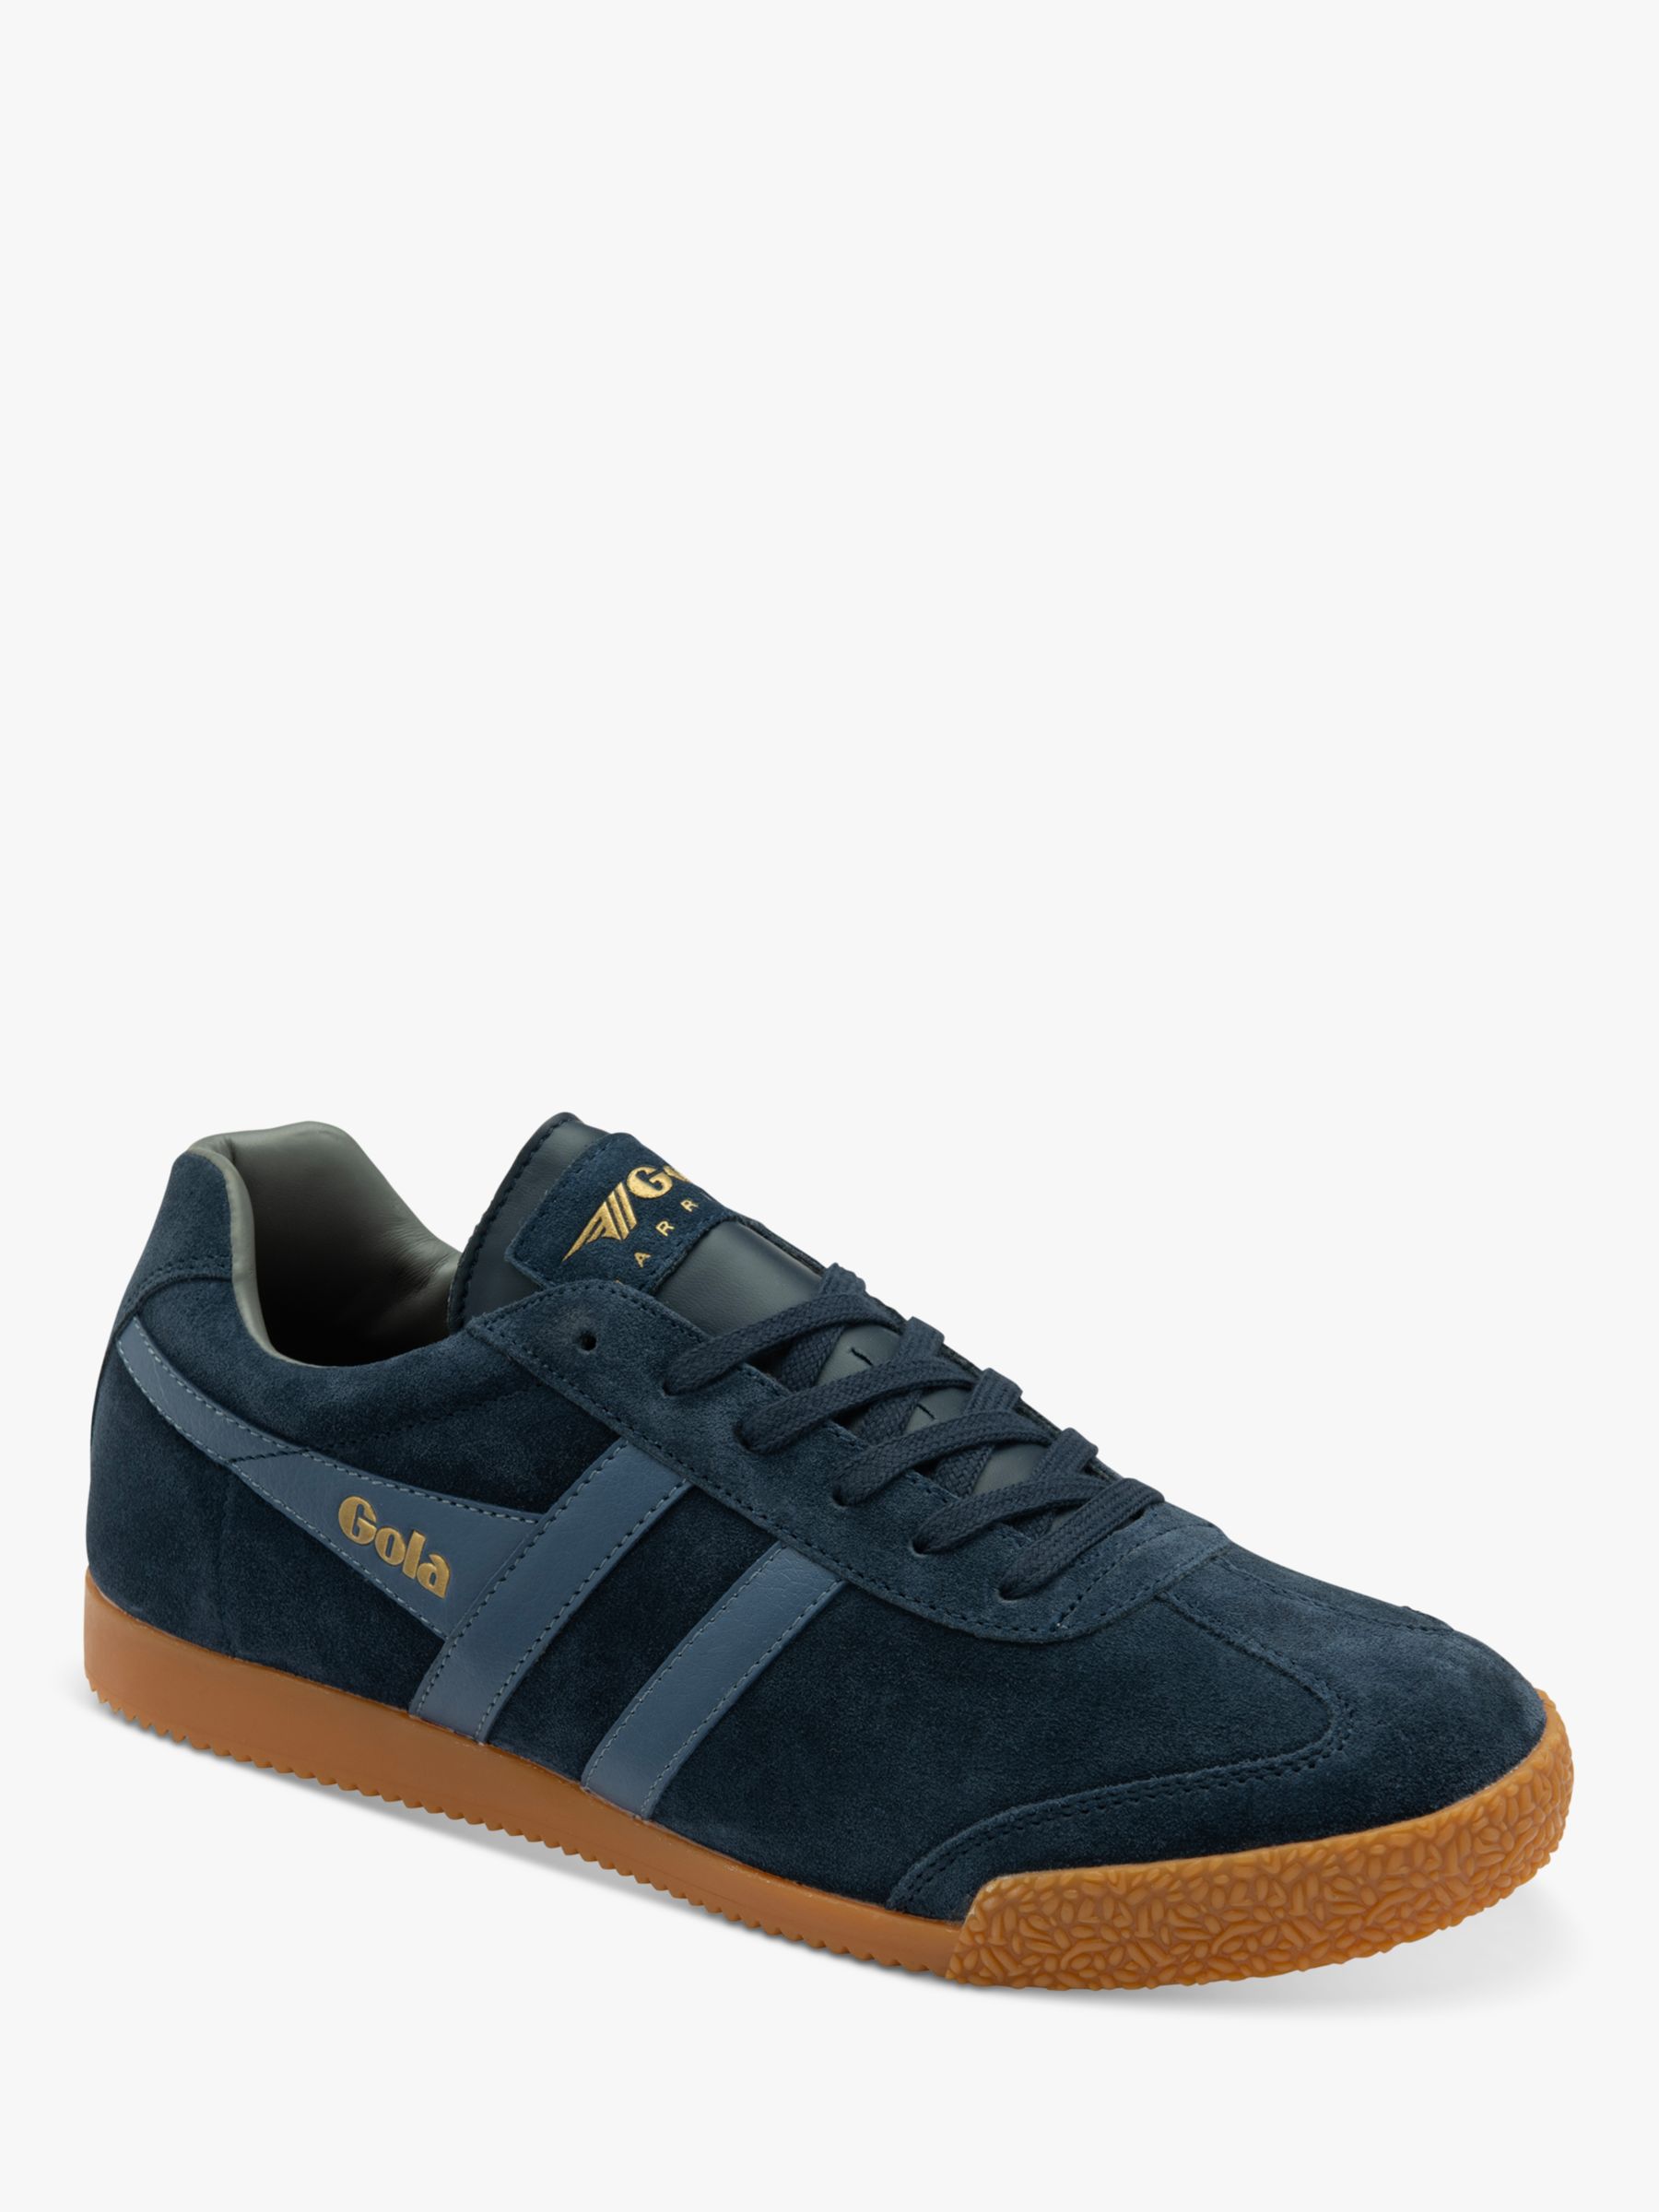 Gola Classics Harrier Suede Lace Up Trainers, Navy/Ash at John Lewis ...